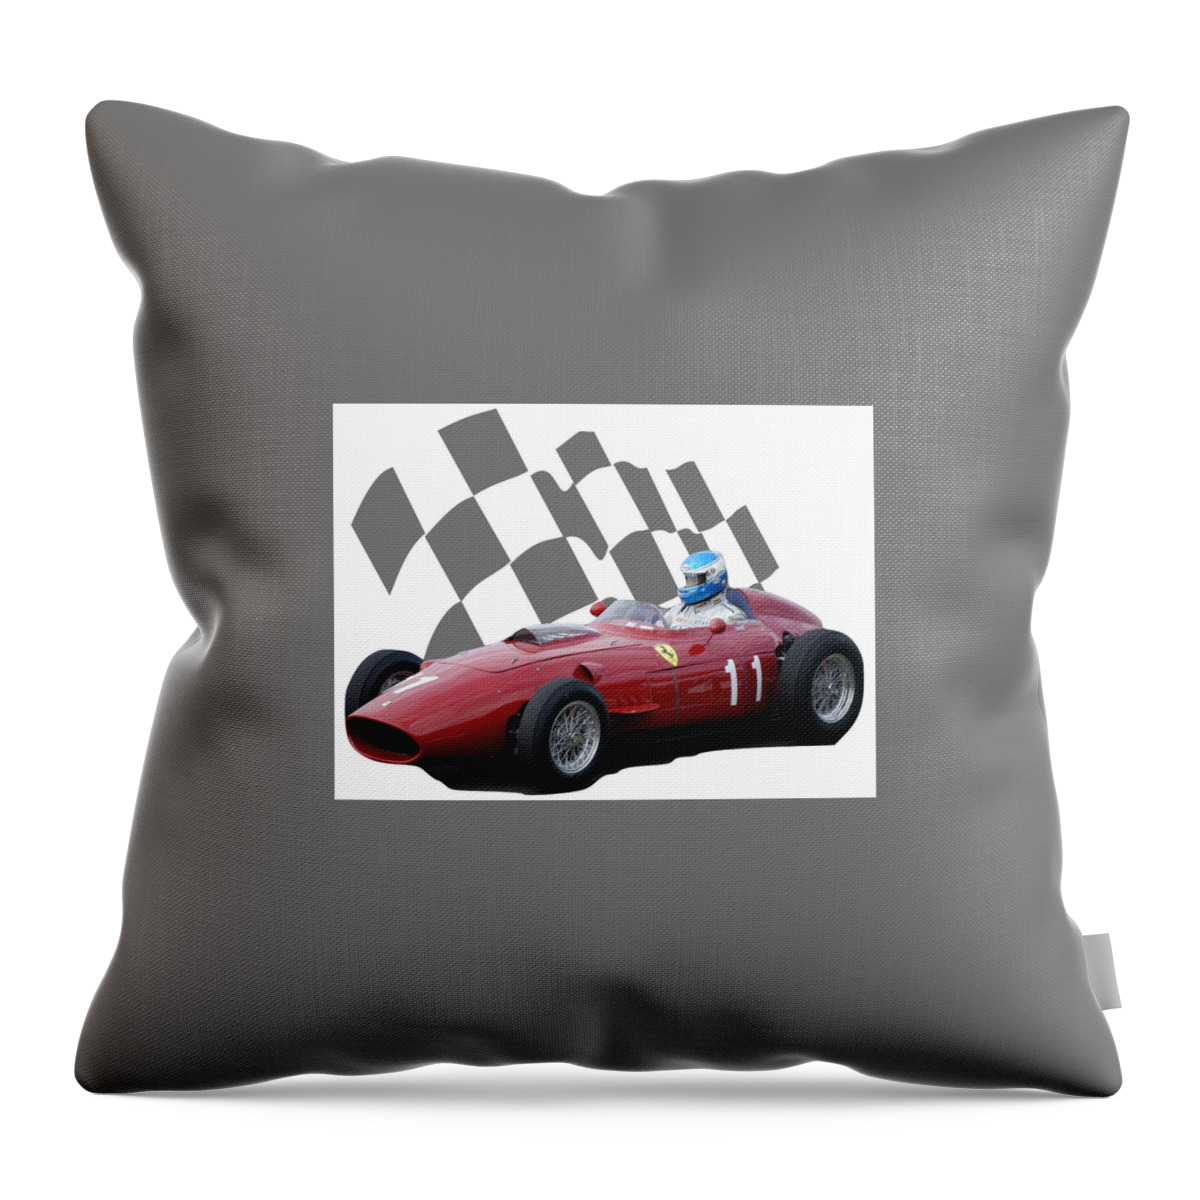 Racing Car Throw Pillow featuring the photograph Vintage Racing Car and Flag 2 by John Colley